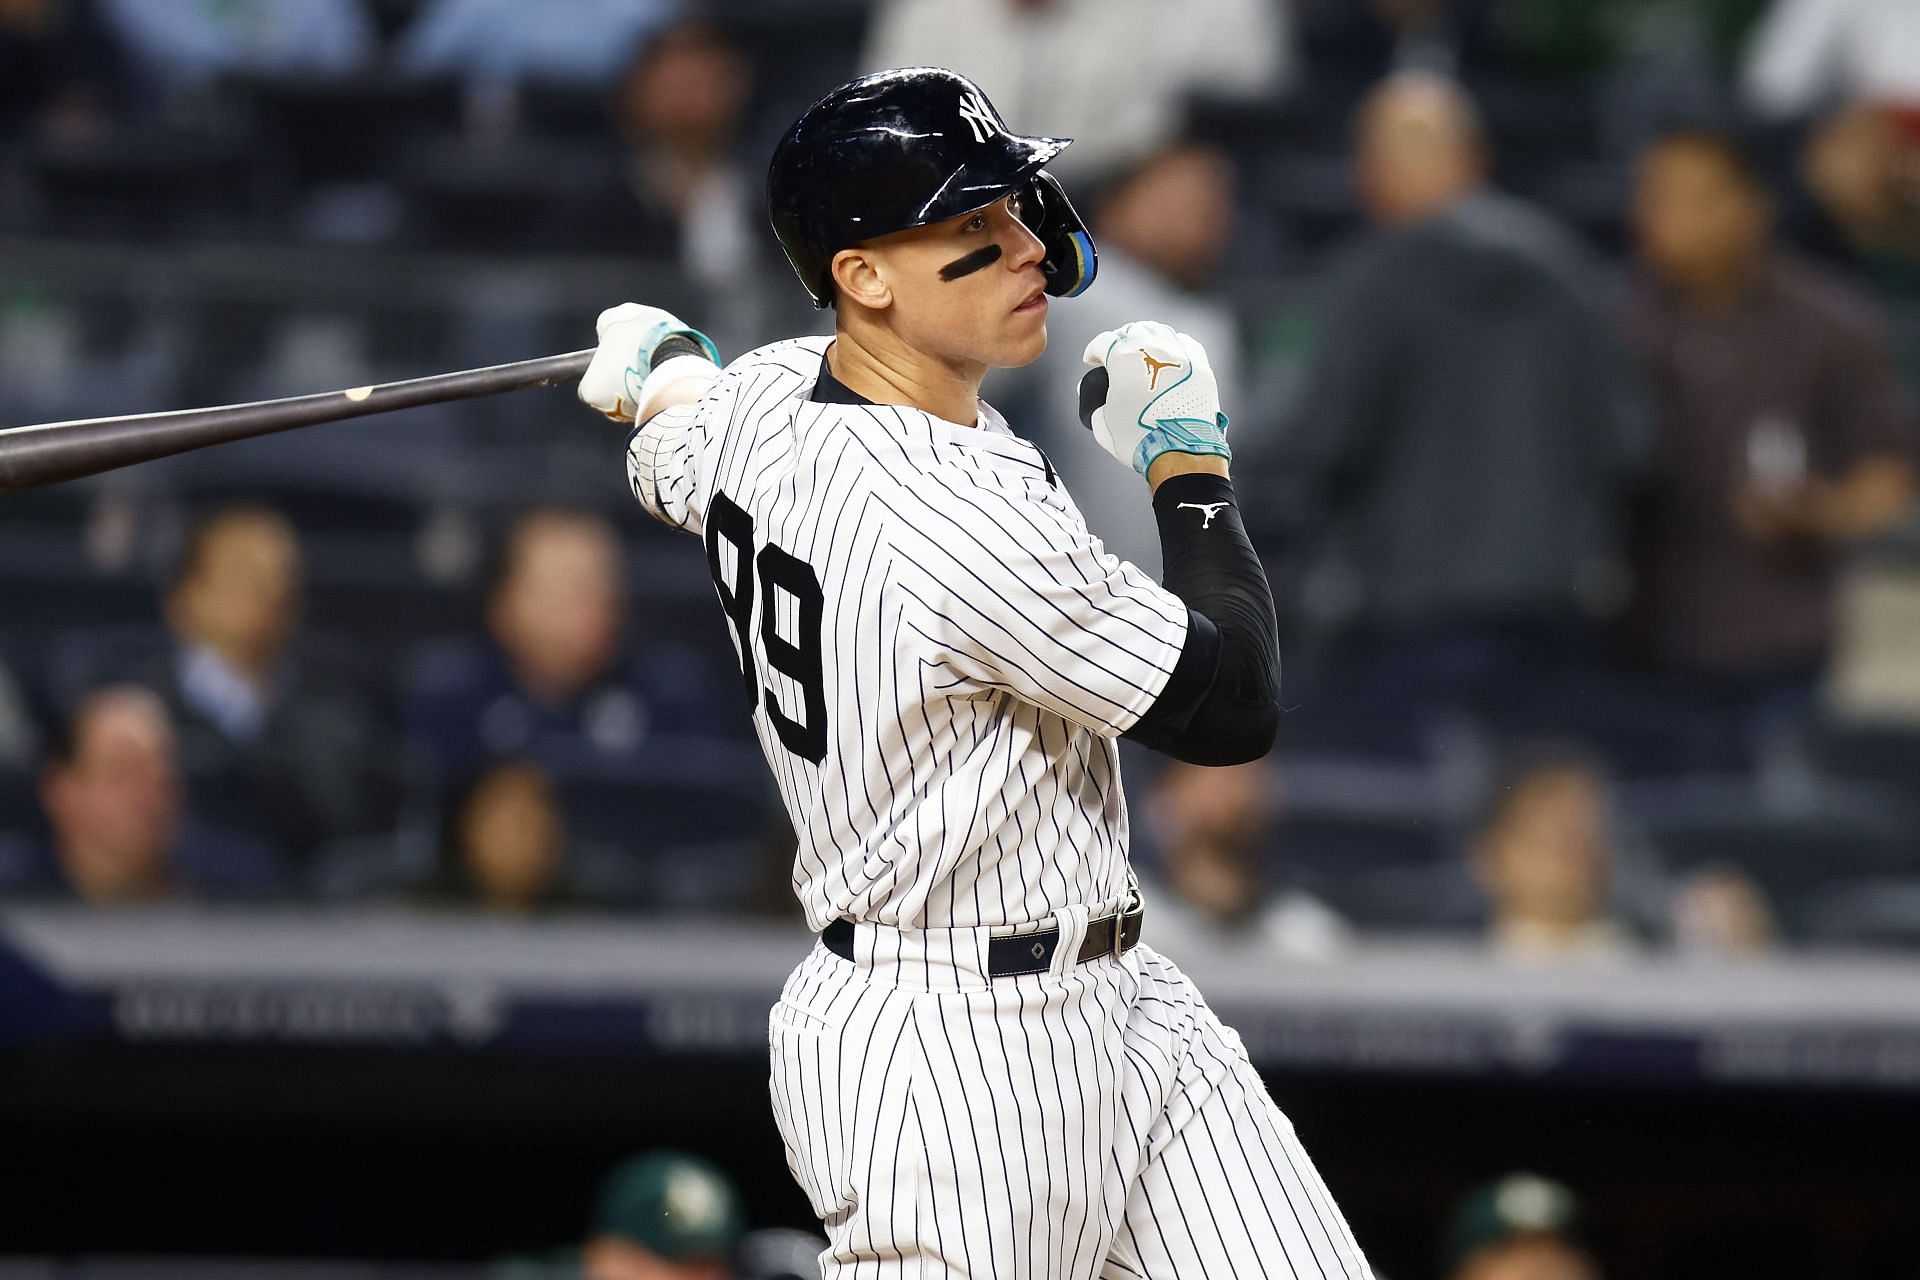 Aaron Judge of the New York Yankees hits an RBI sacrifice fly against the Oakland Athletics at Yankee Stadium